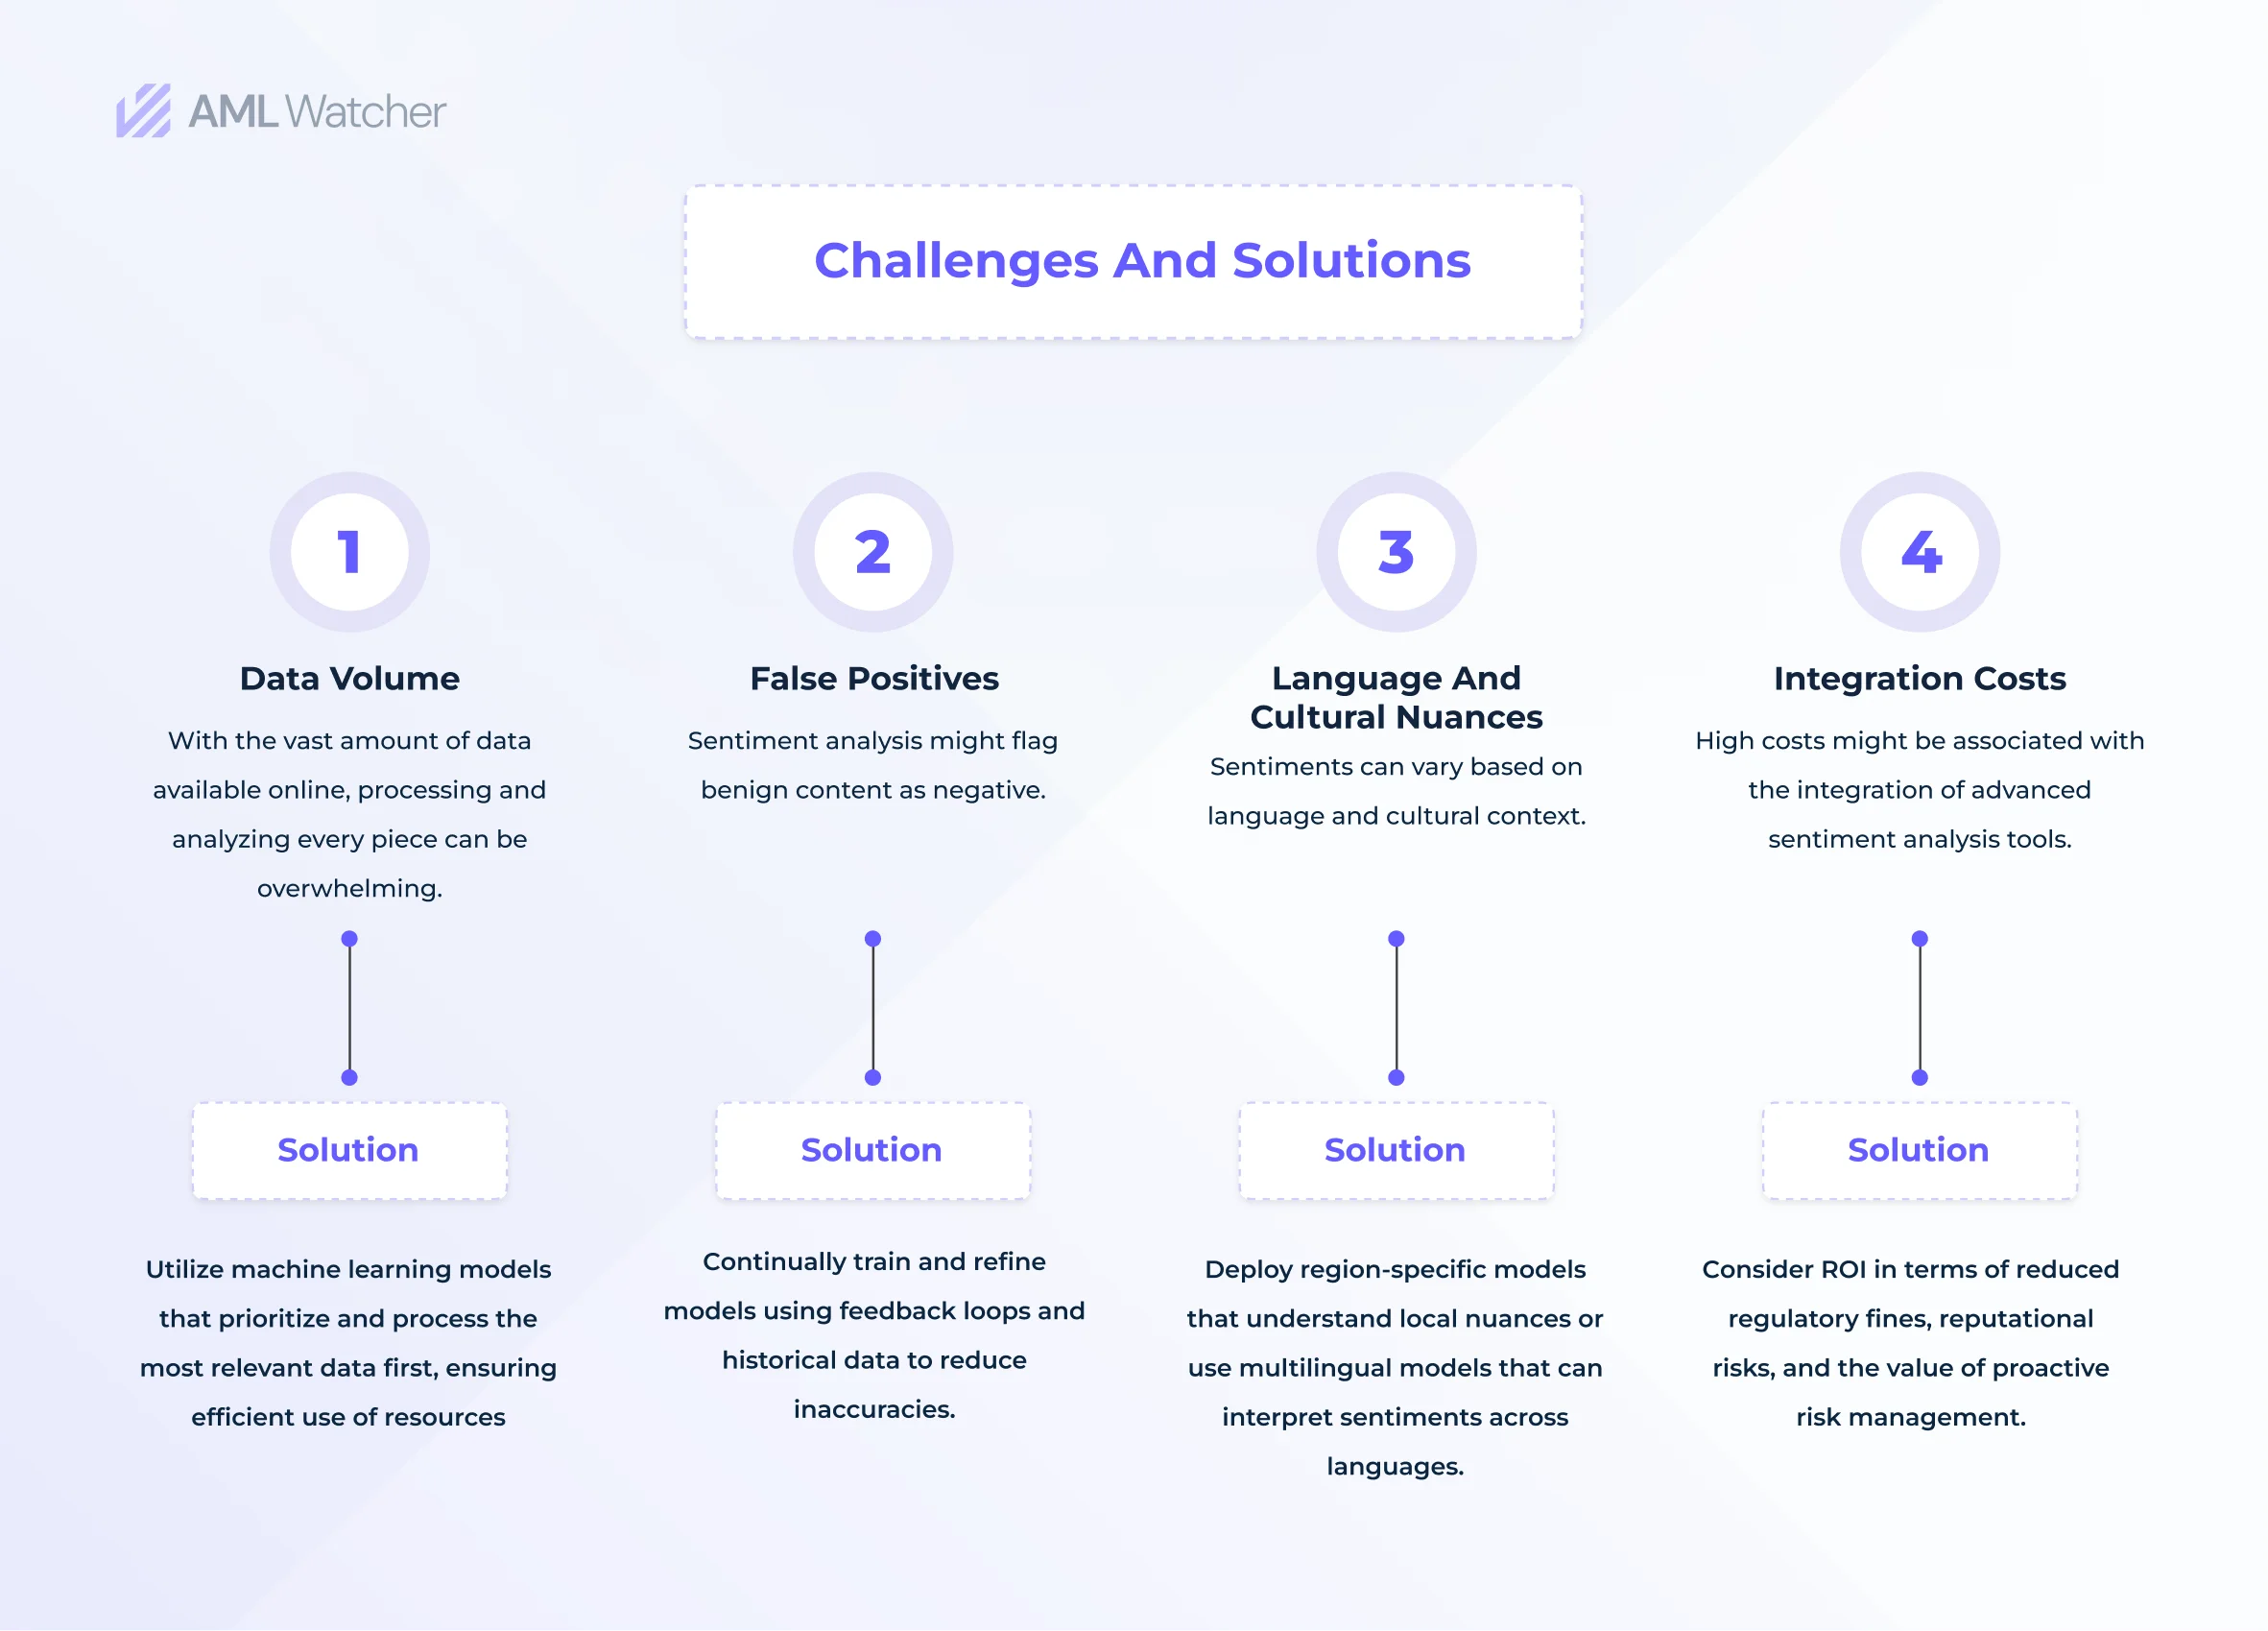 Given infographic is explaining the challenges and solutions. 